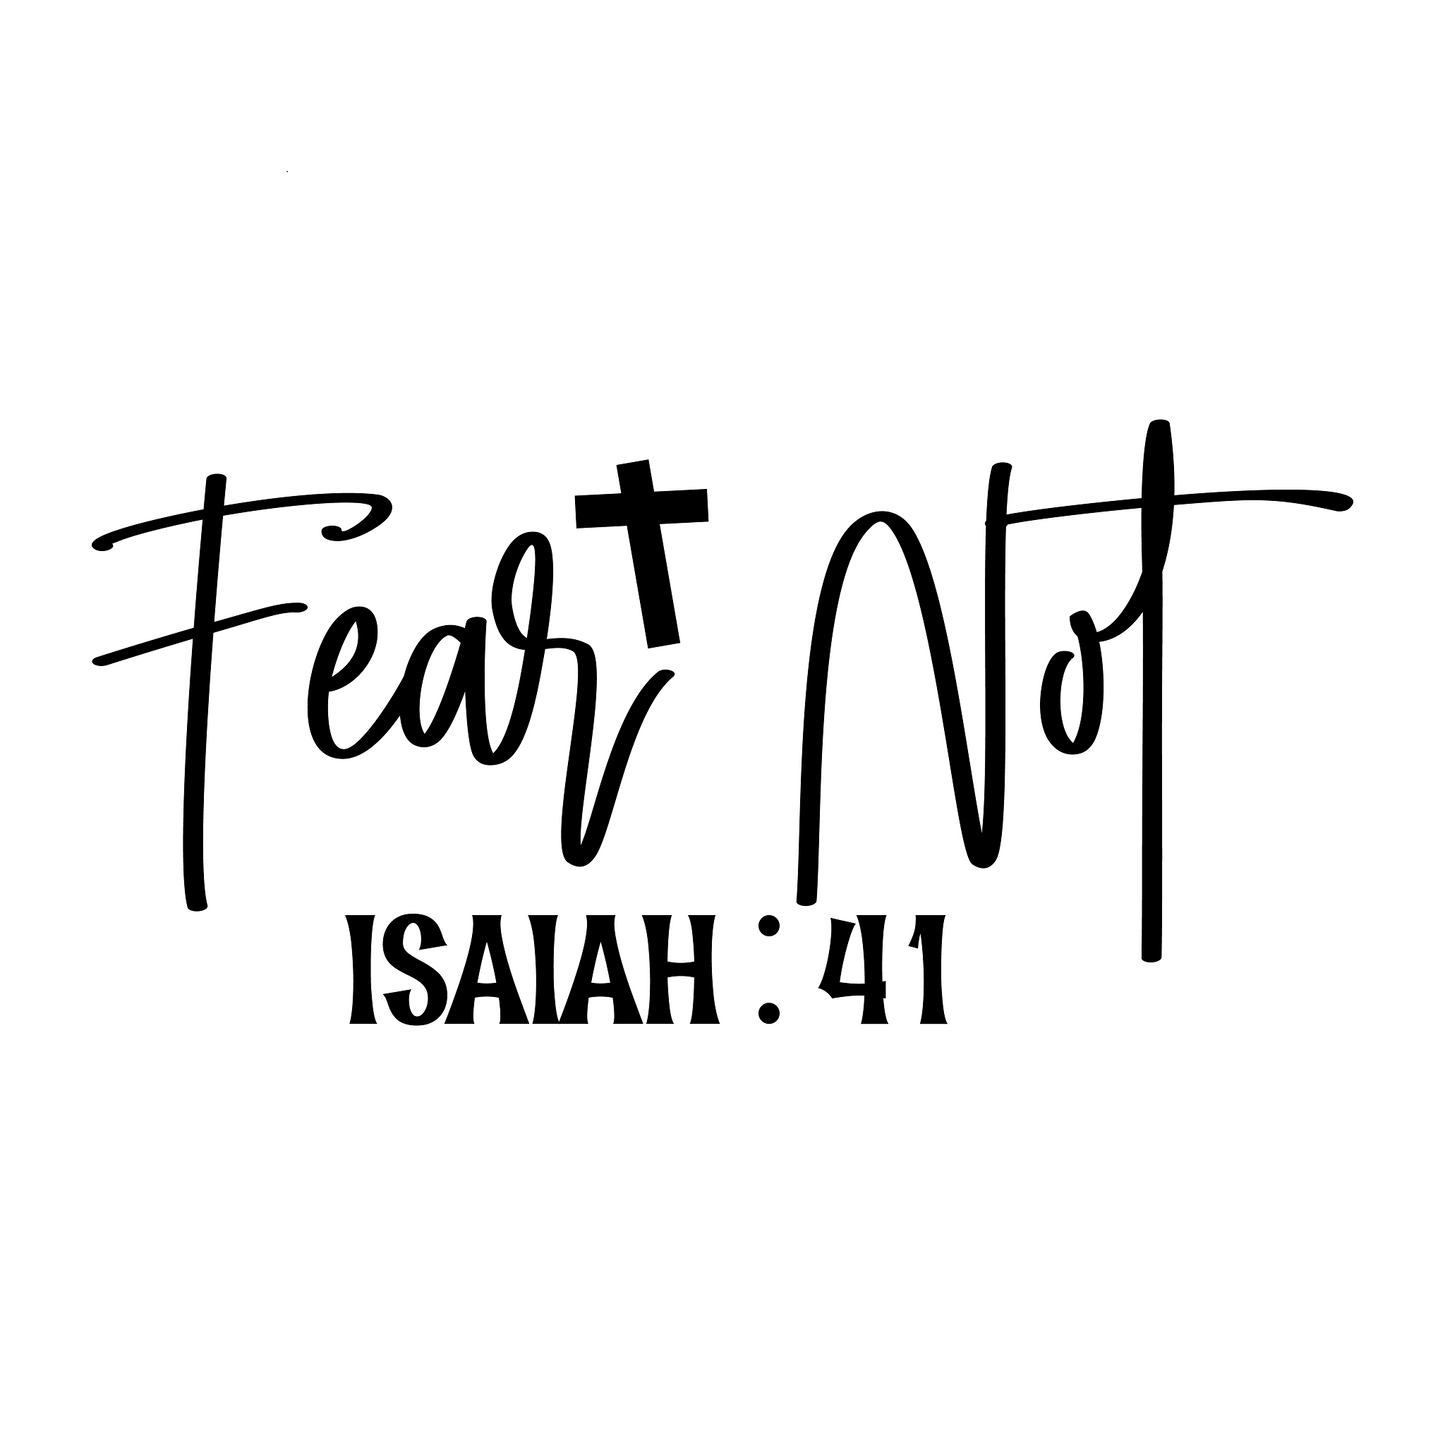 Inspirational Quote "Fear Not ISAIAH : 41" Motivational Sticker Vinyl Decal Motivation Stickers- 5" Vinyl Sticker Waterproof